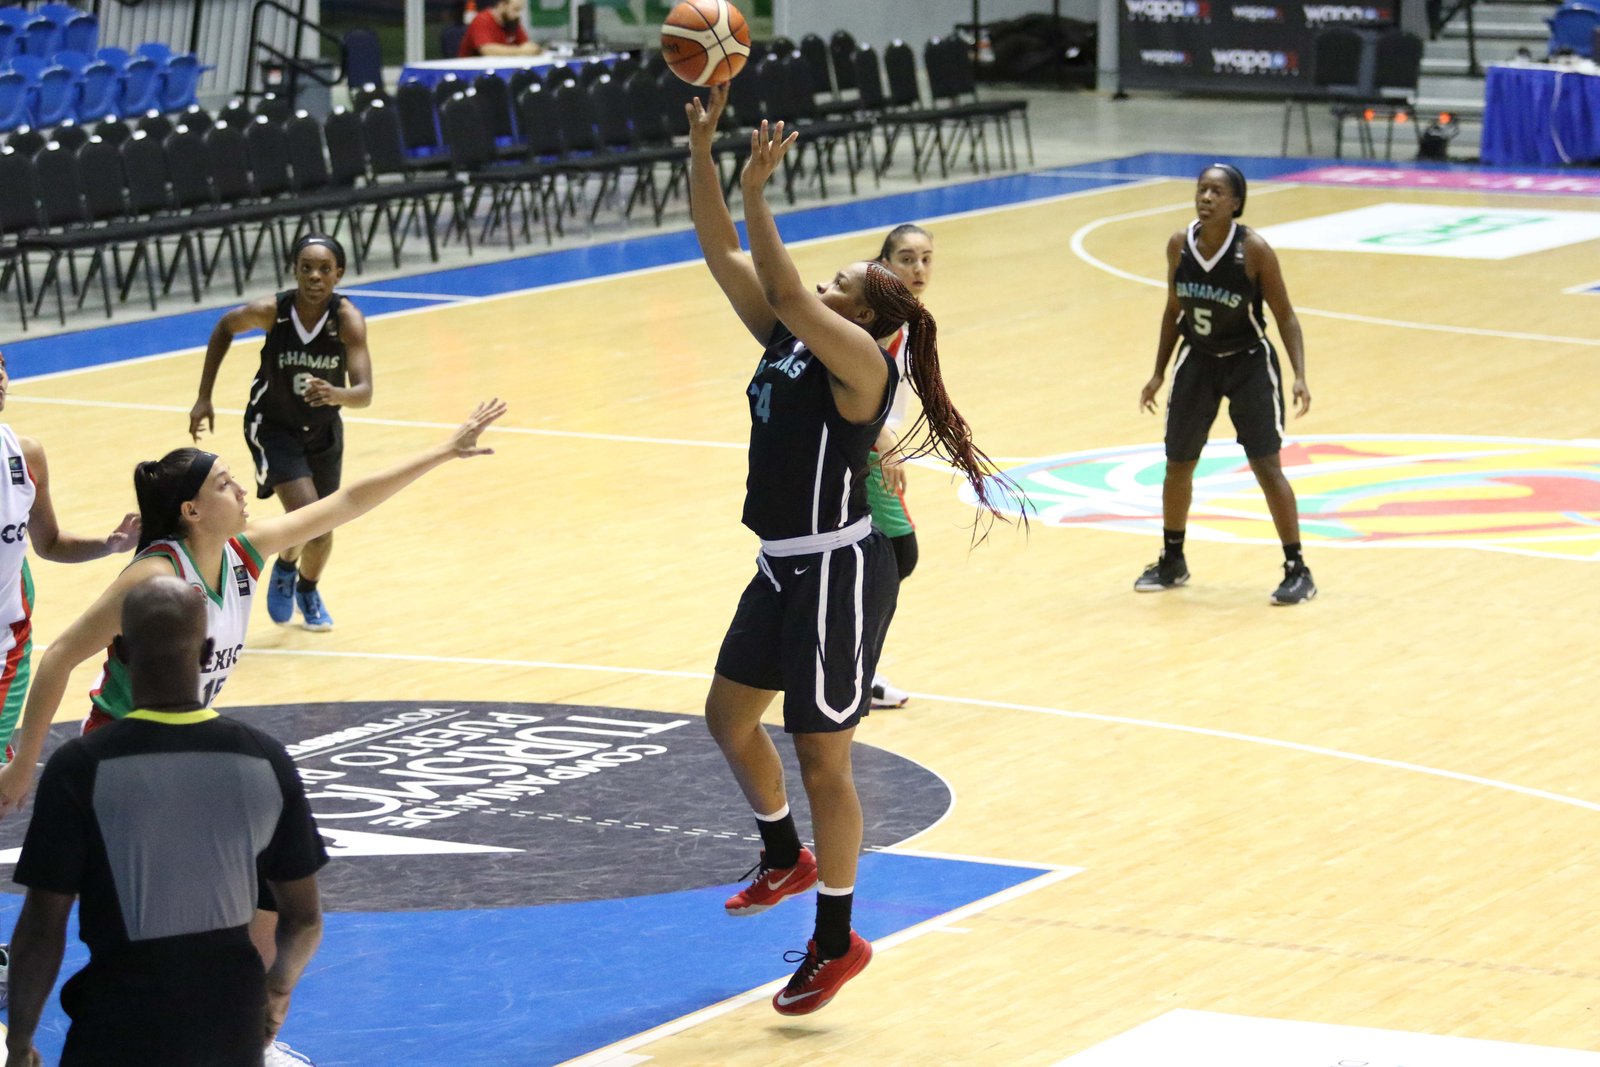 Bahamas gets first win at Centrobasket Eye Witness News